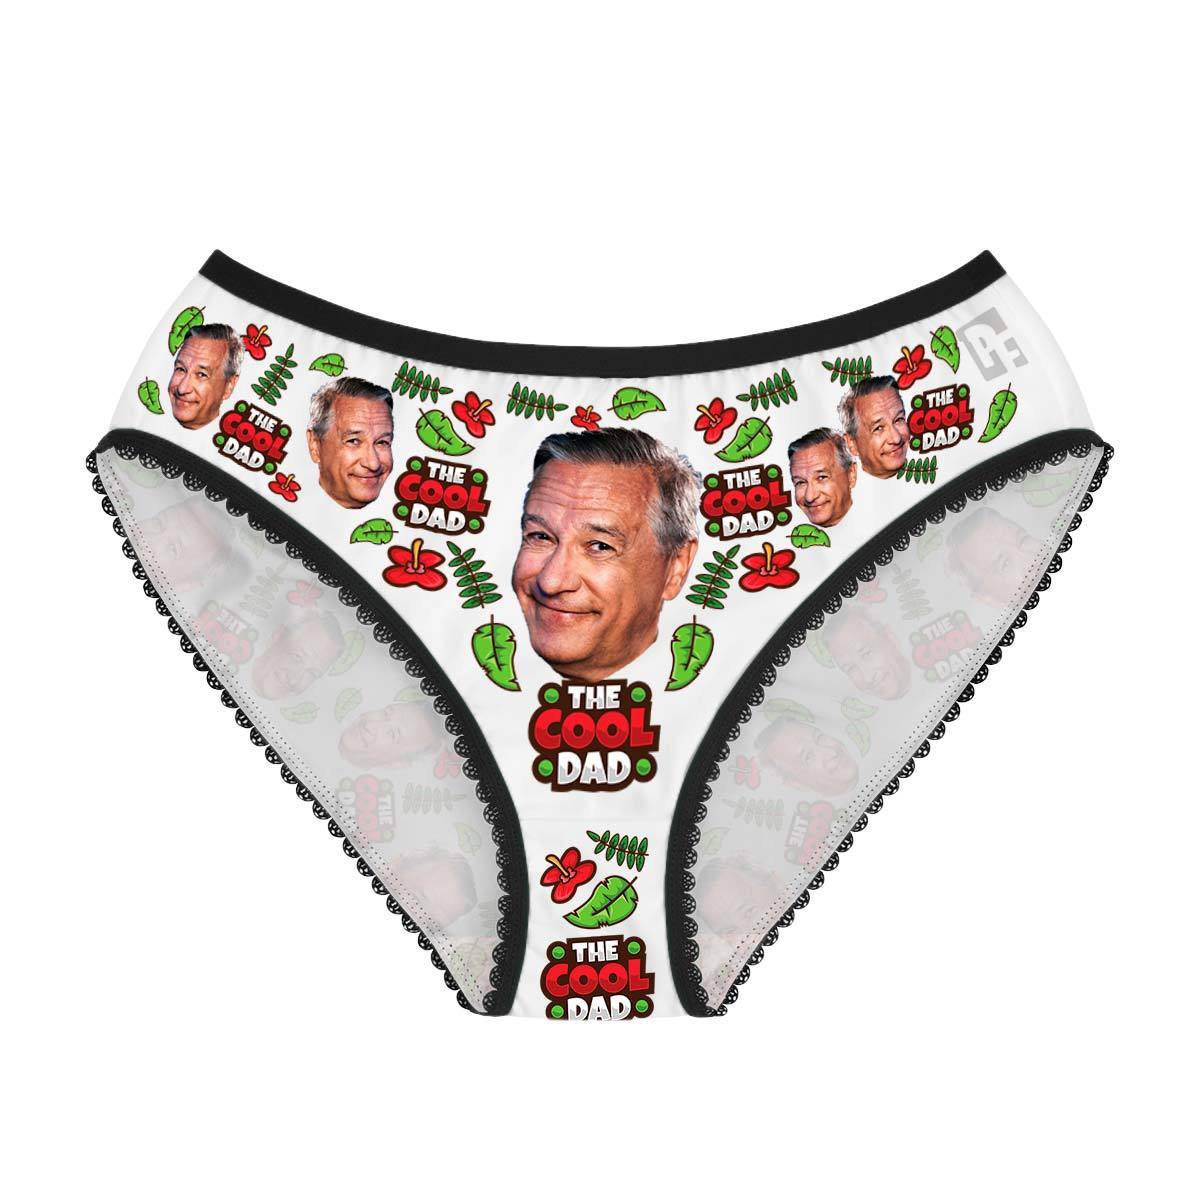 White The cool dad women's underwear briefs personalized with photo printed on them